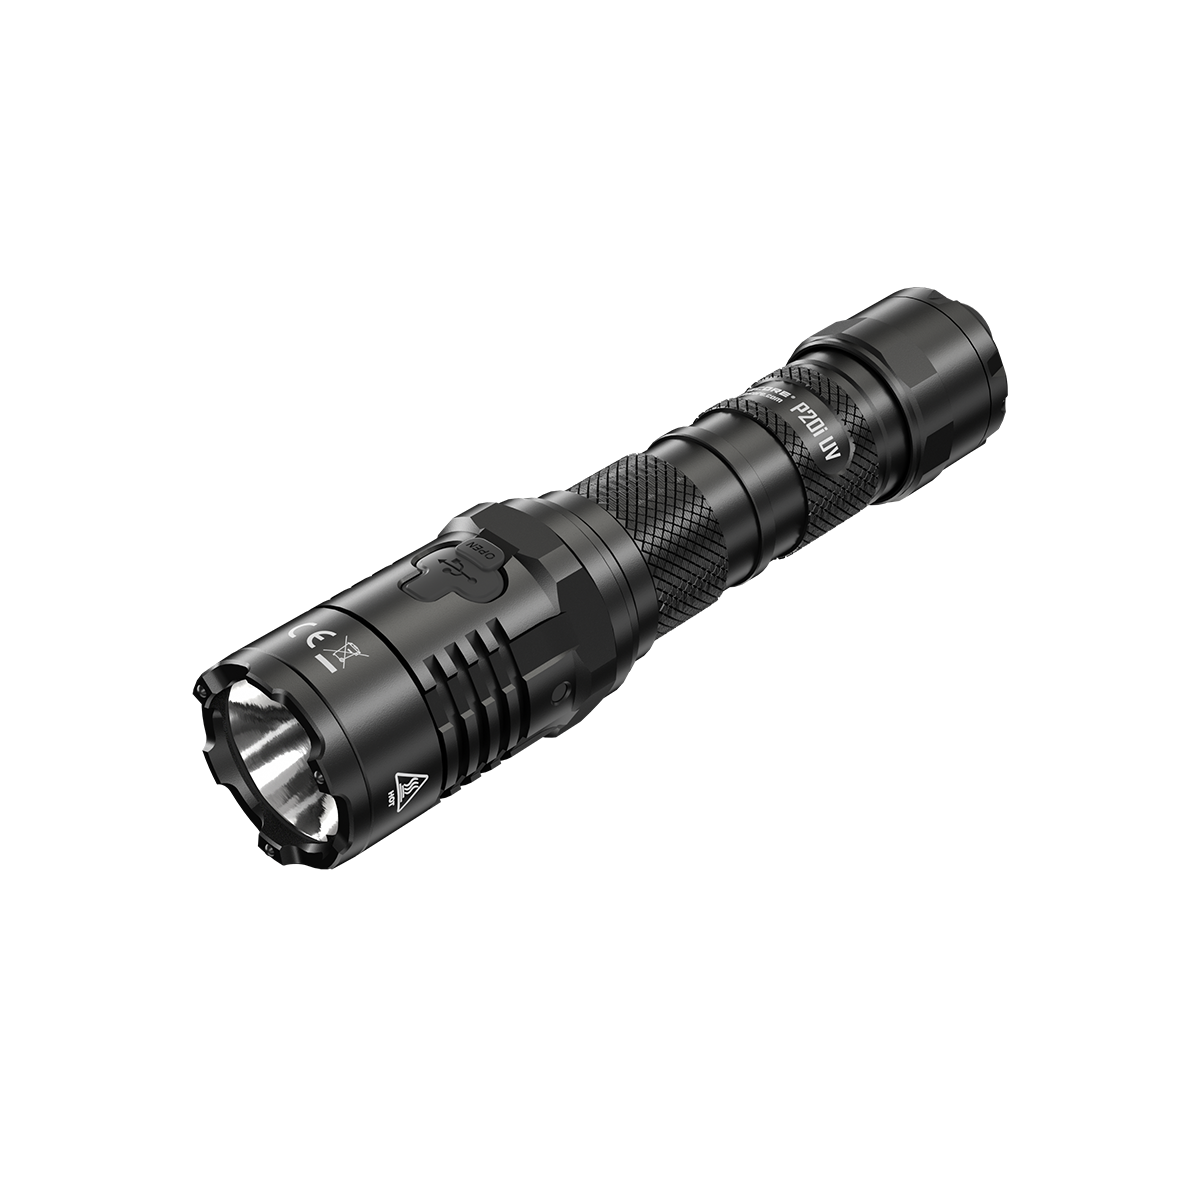 NITECORE MT10C 920lm Tactical Red & White Flashlight with Rechargeable  Battery